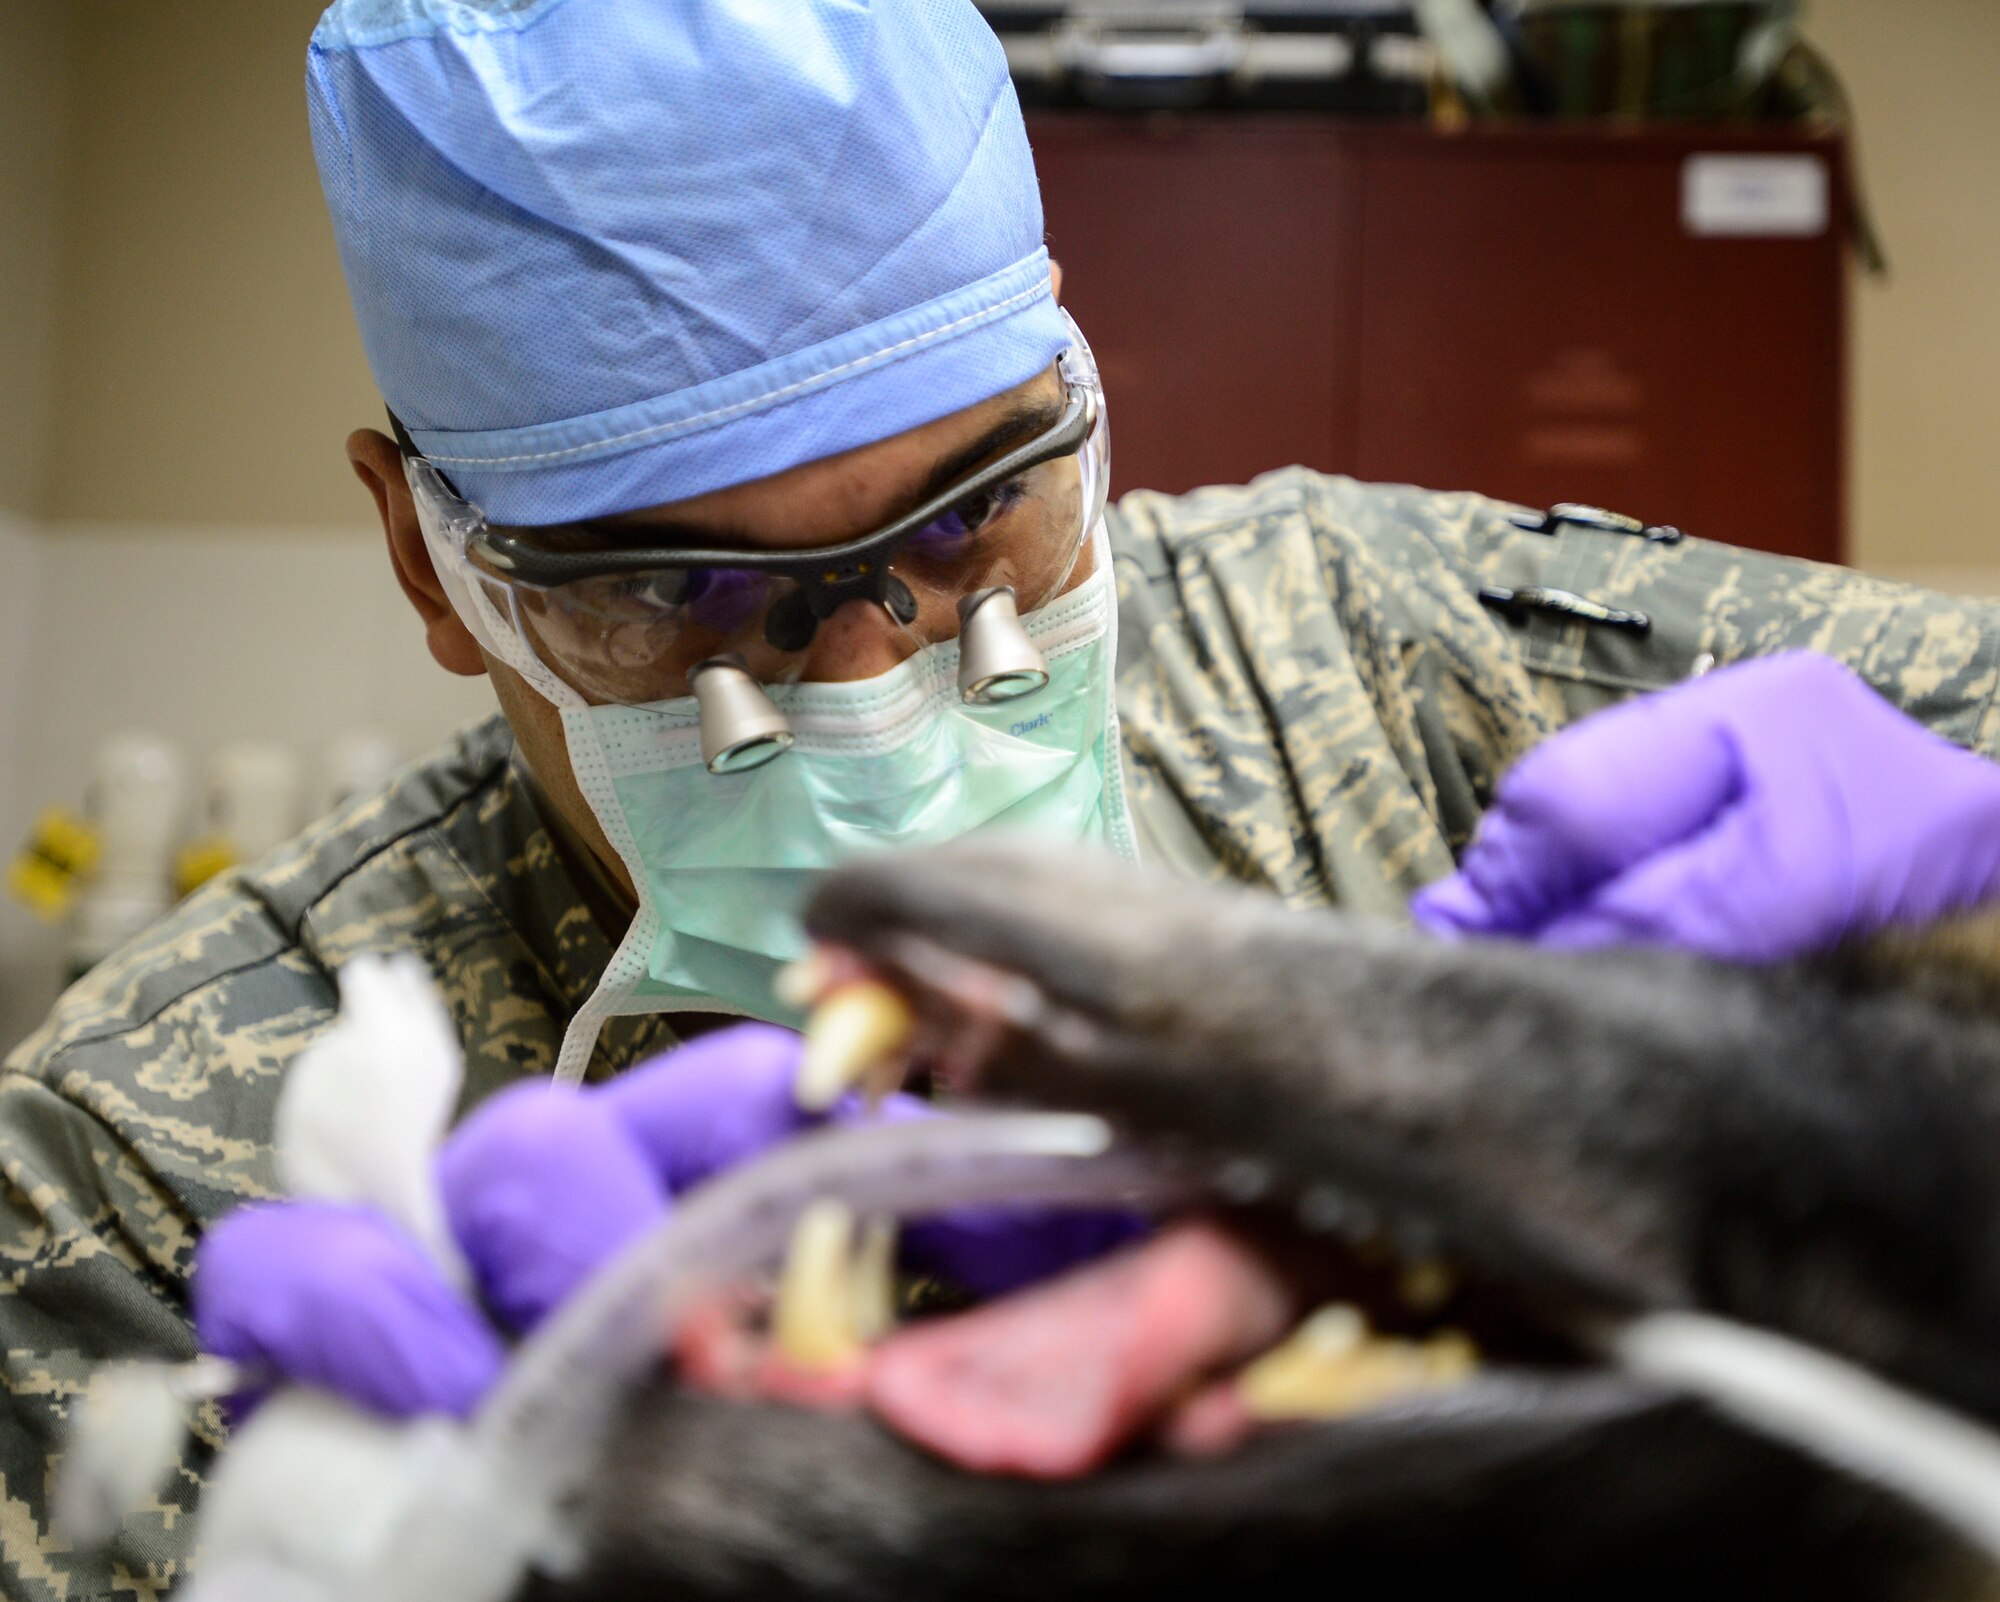 U.S. Air Force Staff Sgt. Gregory Johnson, 386th Expeditionary Medical Support Squadron dental technician, removes plaque from 332nd Expeditionary Security Forces Squadron Military Working Dog VVladimir’s teeth during a dental cleaning at an undisclosed location in Southwest Asia, Sept. 24, 2015. MWDs receive routine medical care to aid their human military partners in the fight against the Islamic State or ISIL. (U.S. Air Force photo by Senior Airman Racheal E. Watson/Released) 